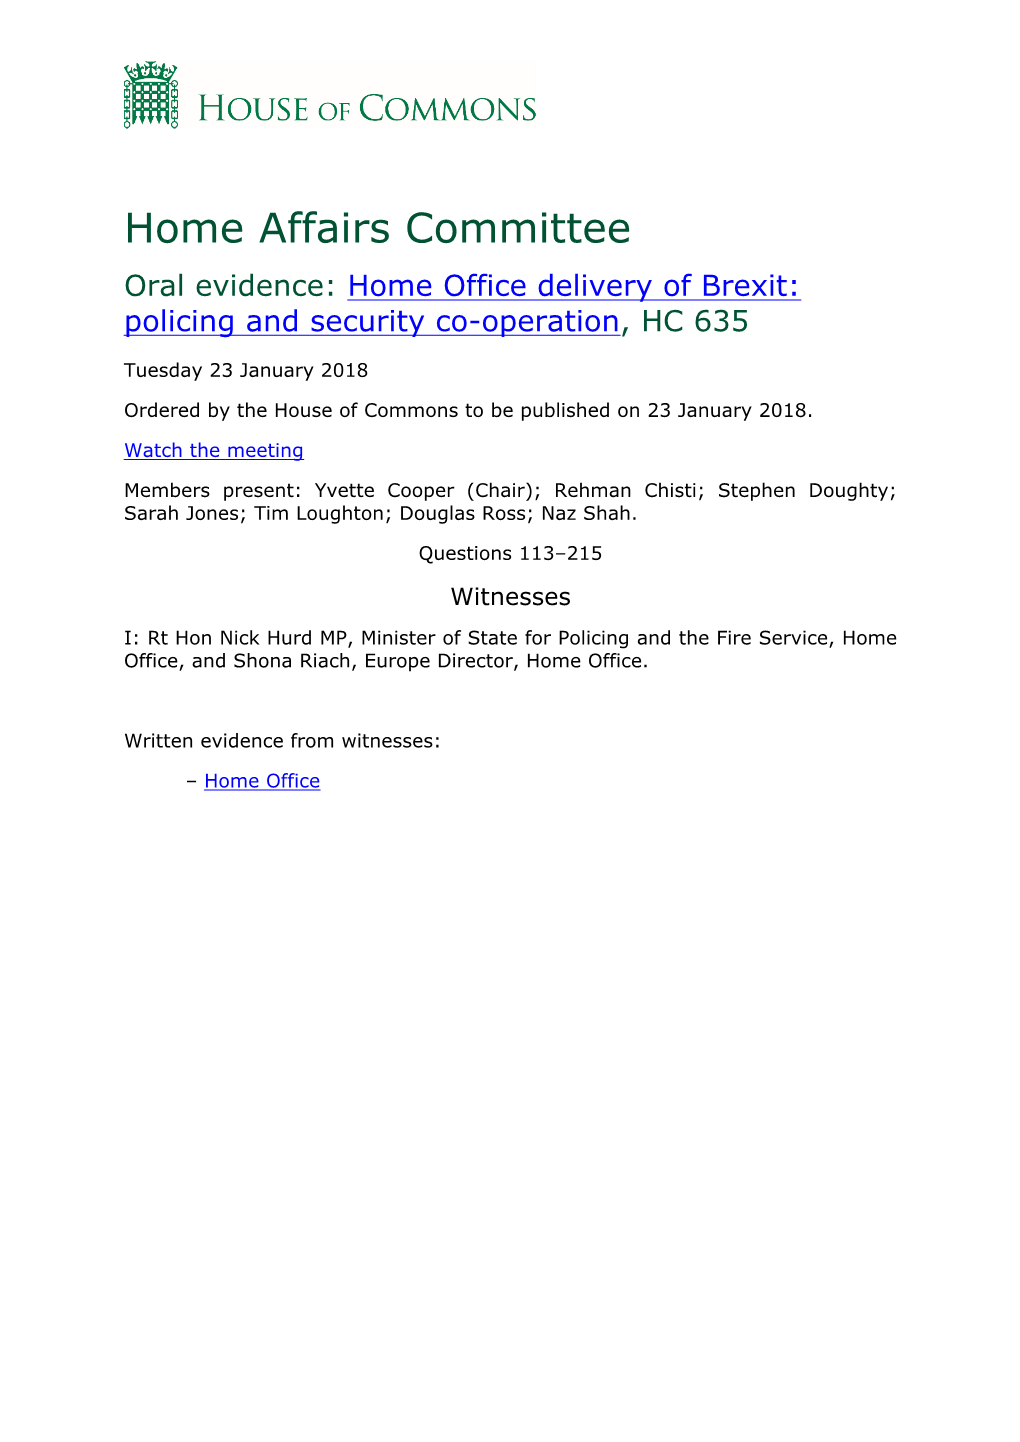 Oral Evidence: Home Office Delivery of Brexit: Policing and Security Co-Operation, HC 635